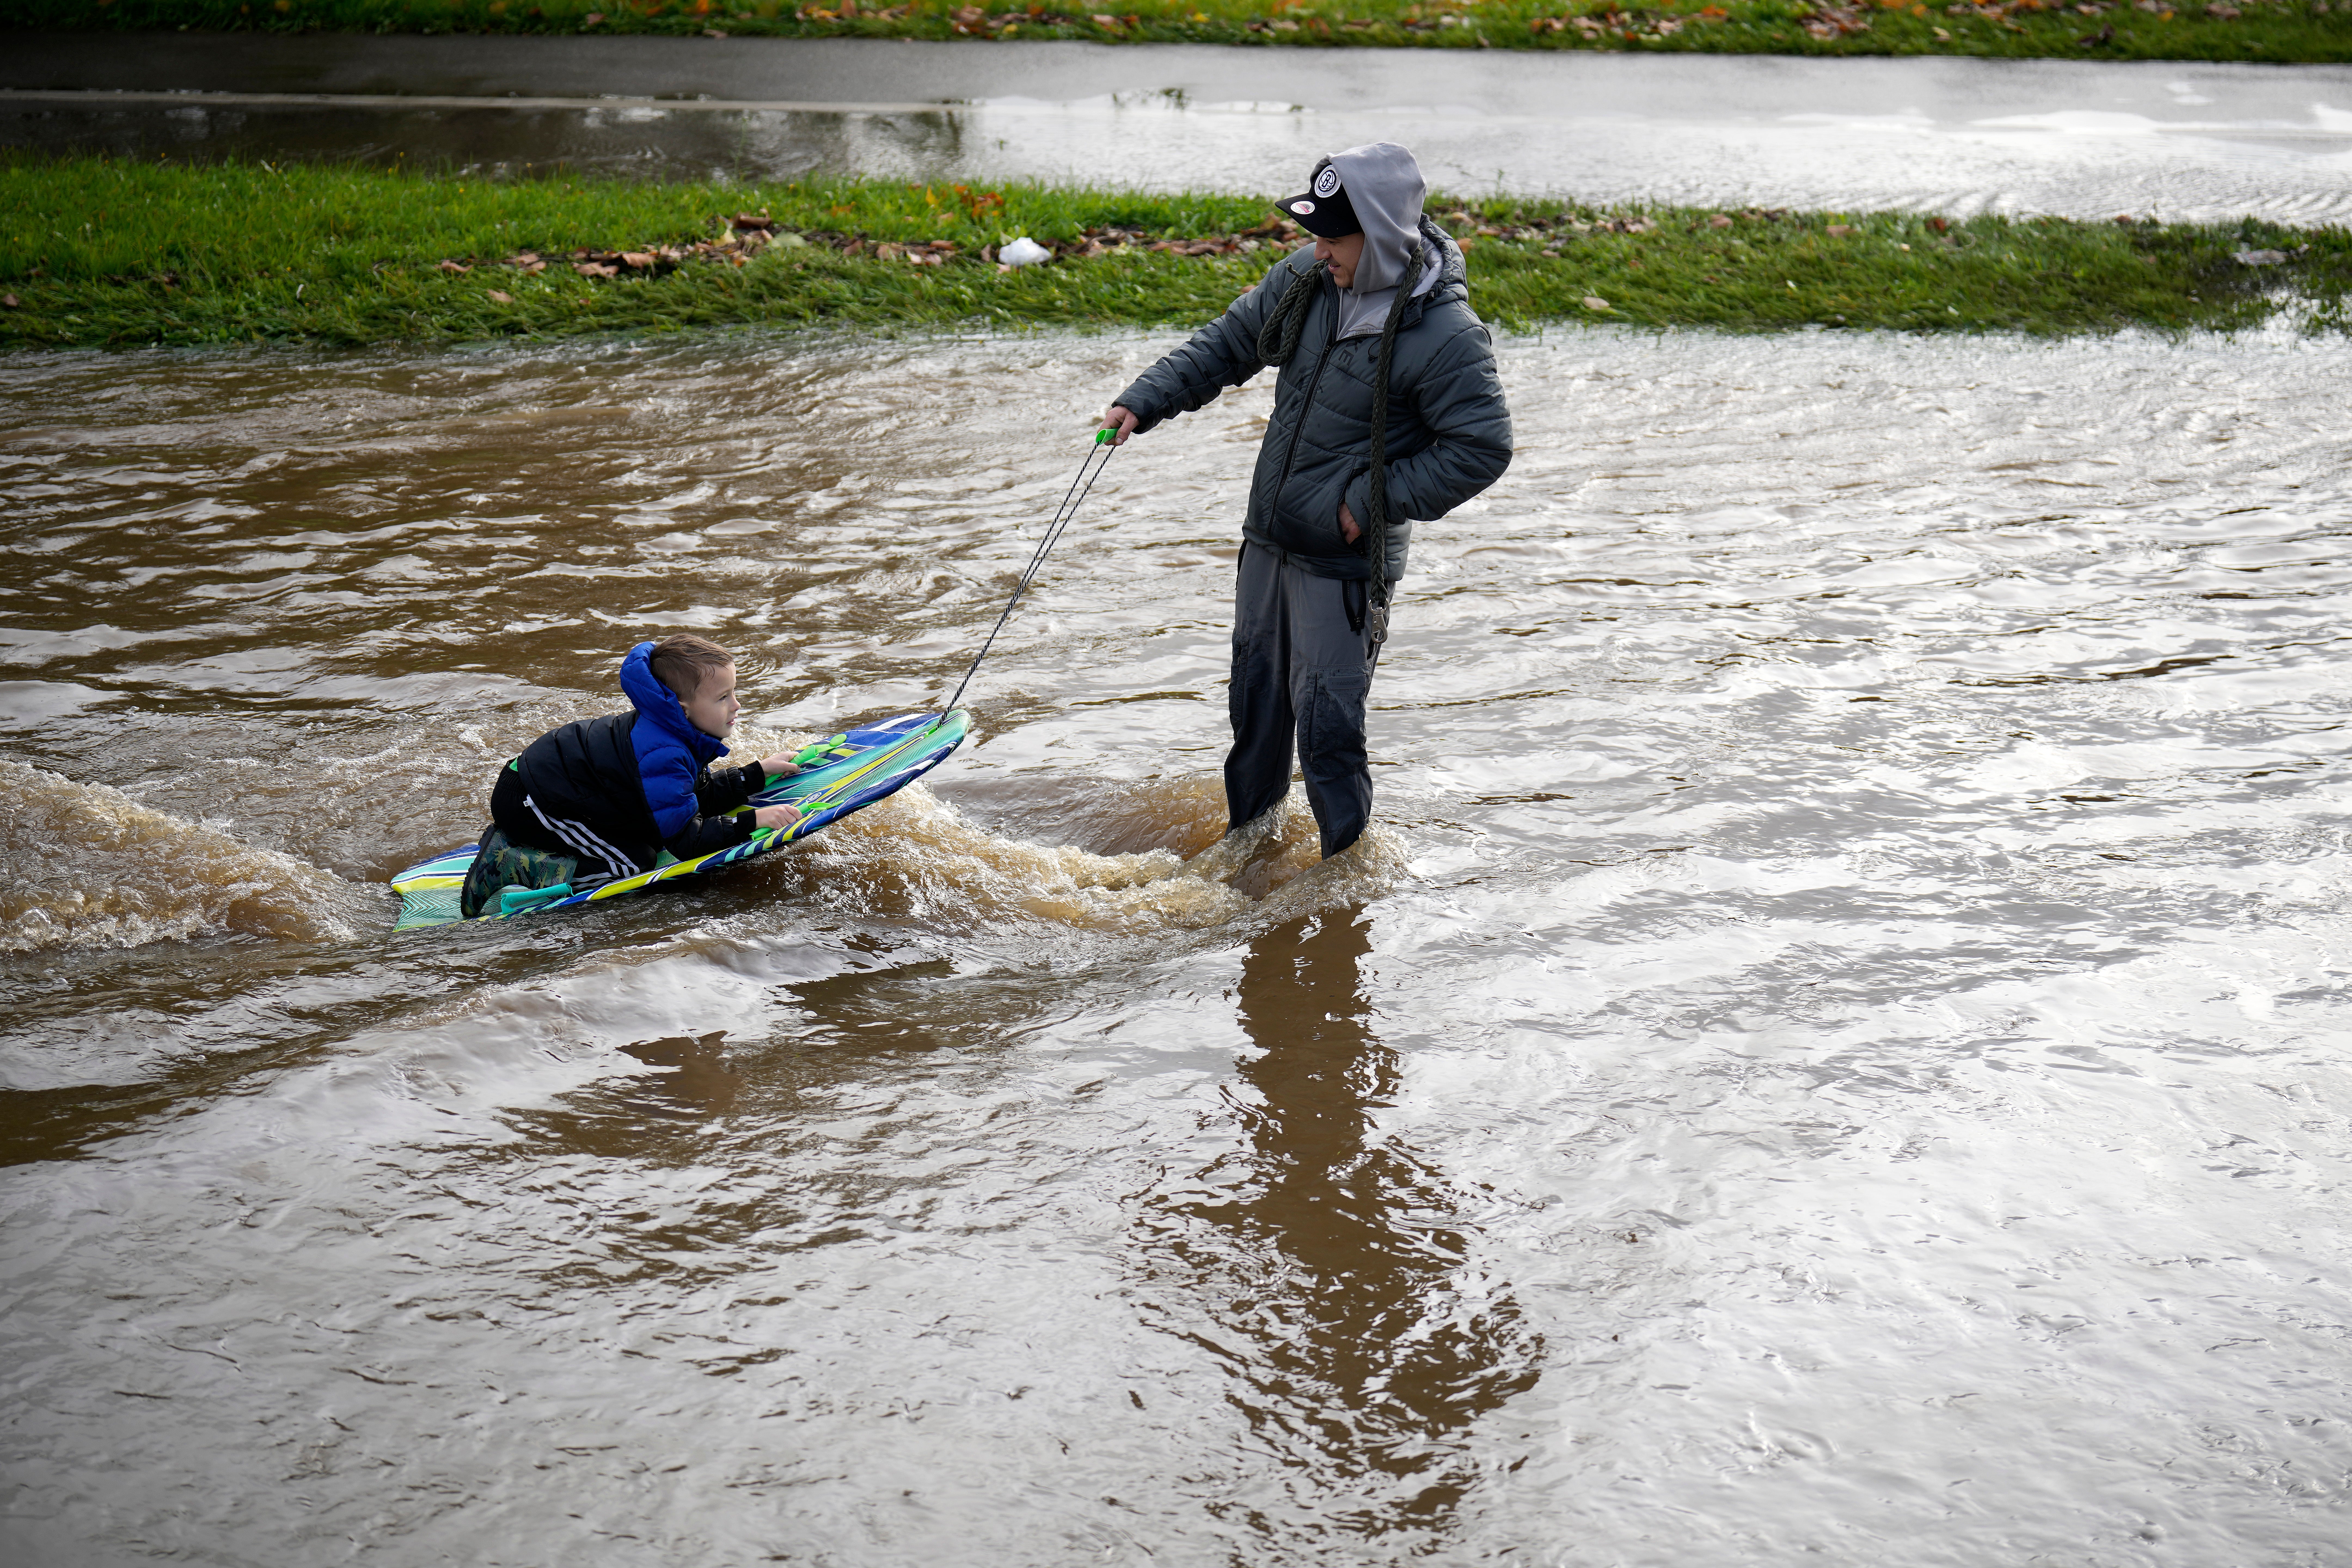 A man pulls a boy on a body board through flood water in the Pentagon area of Derby after the River Derwent burst its banks during storm Babet on Saturday